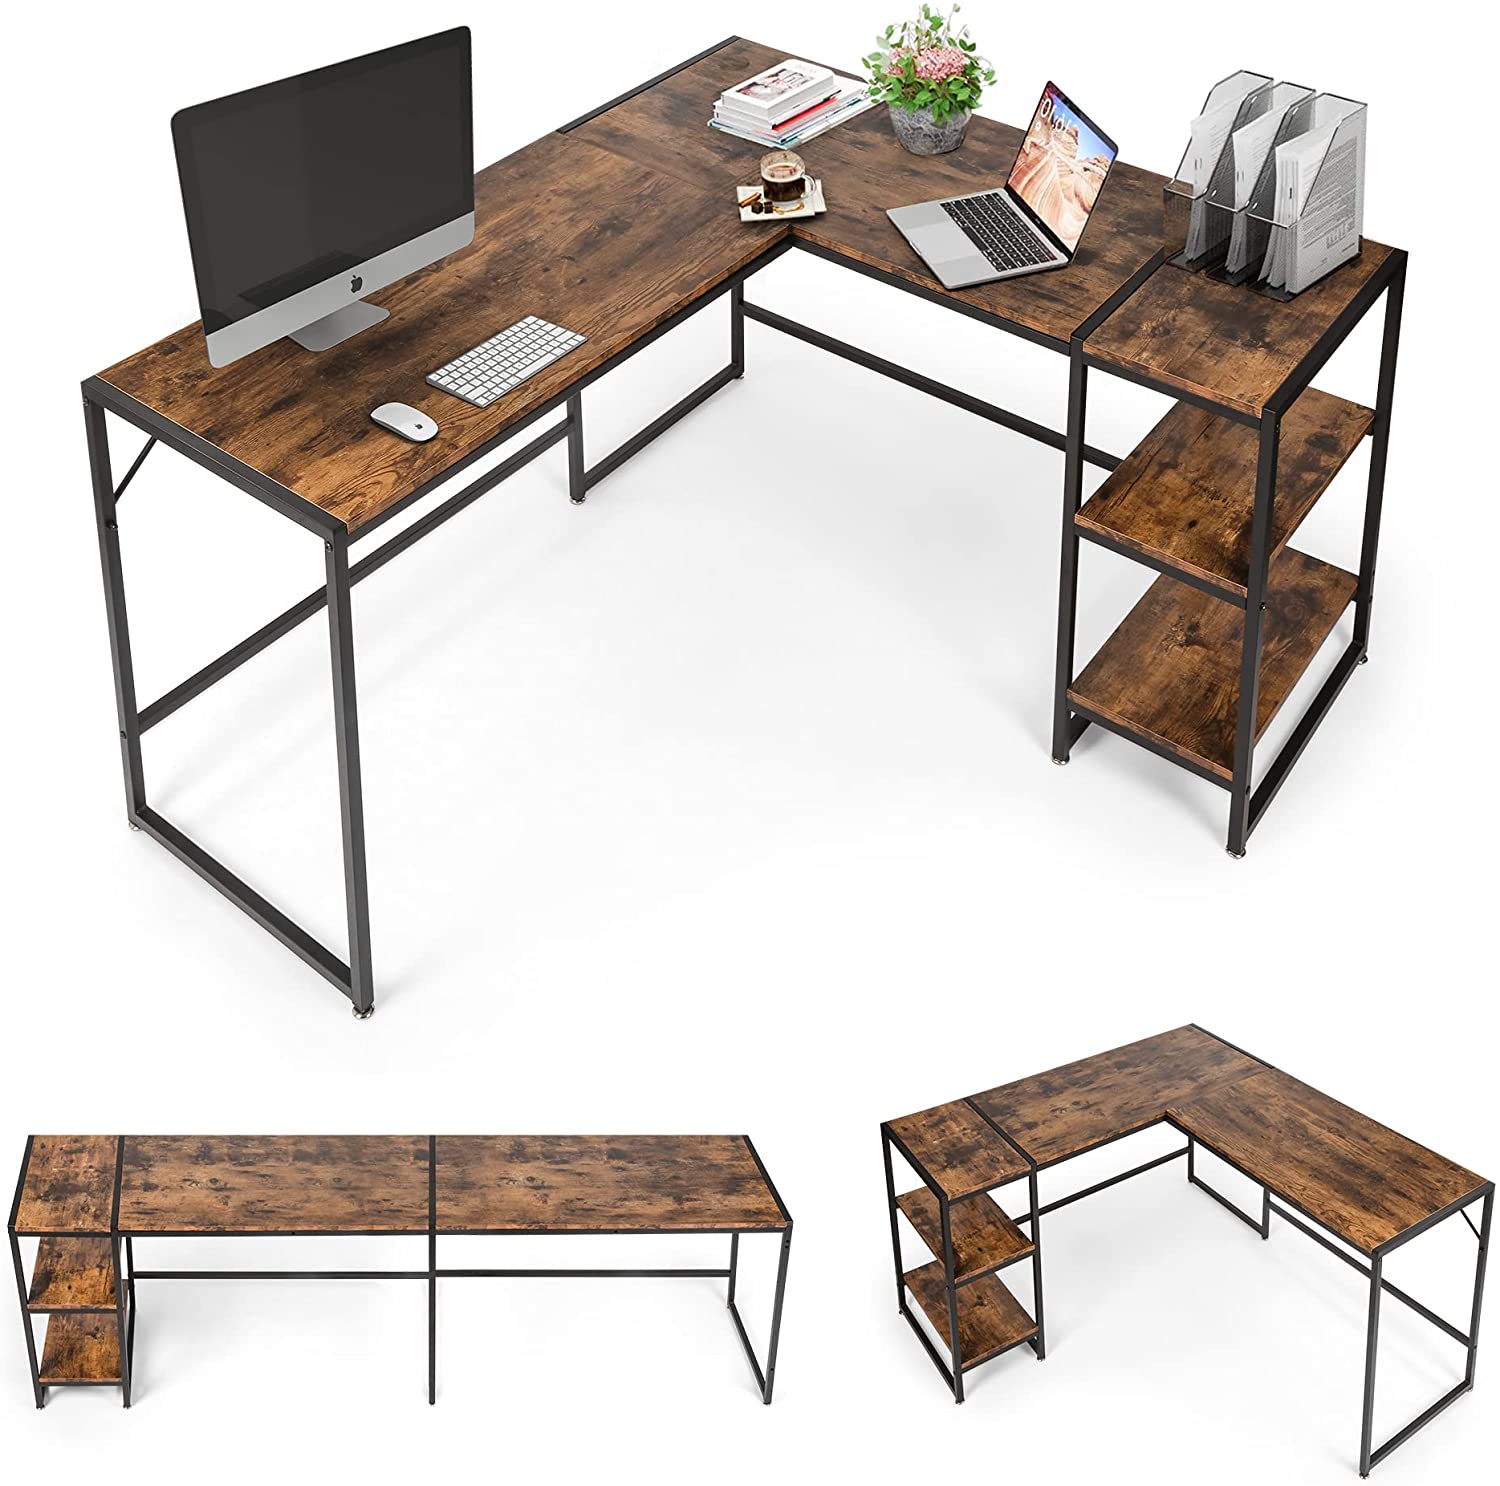 Versatile L-Shaped Desk: Perfect for Home Offices, Gaming, and More – Easy Assembly, Ample Storage, Ergonomic Design